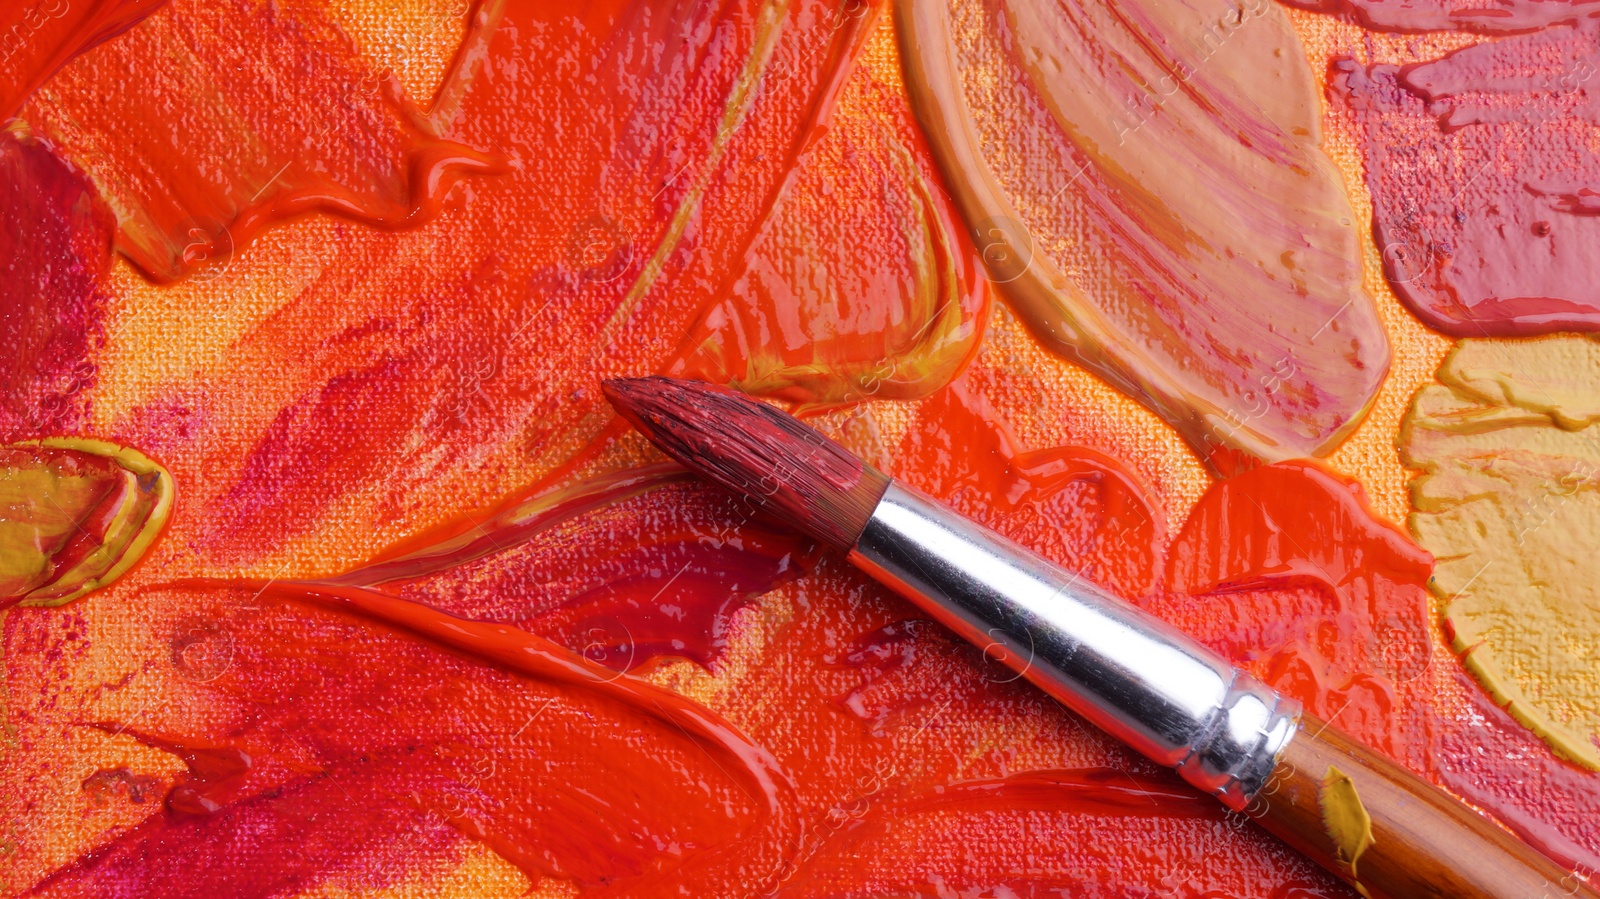 Photo of Brush on artist's palette with mixed paints, top view